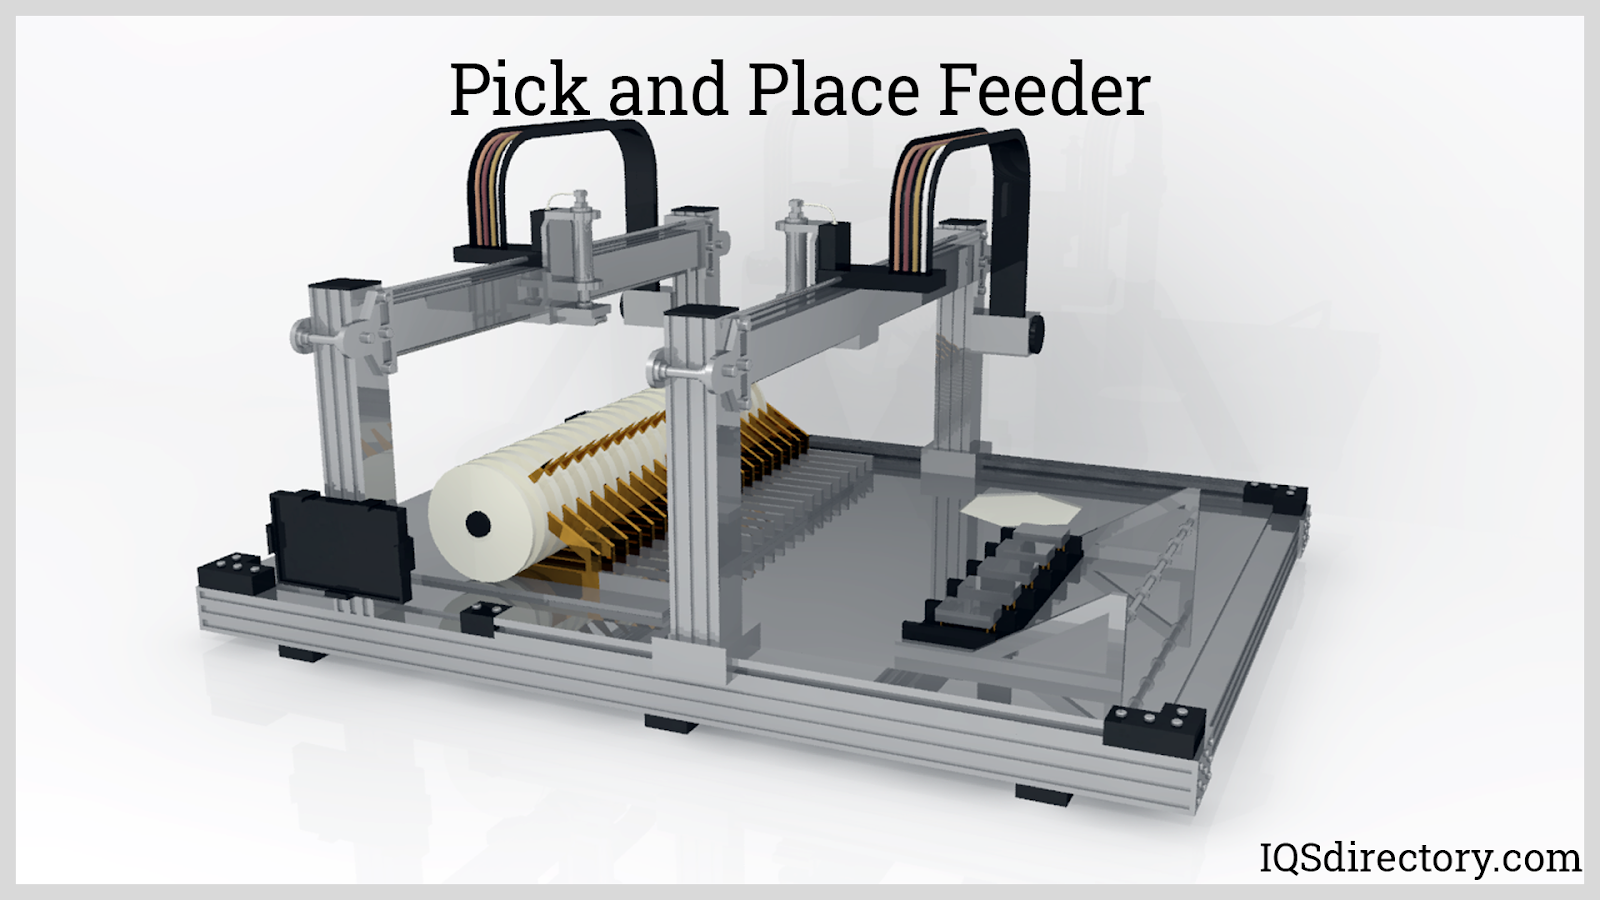 Pick and Place Feeder